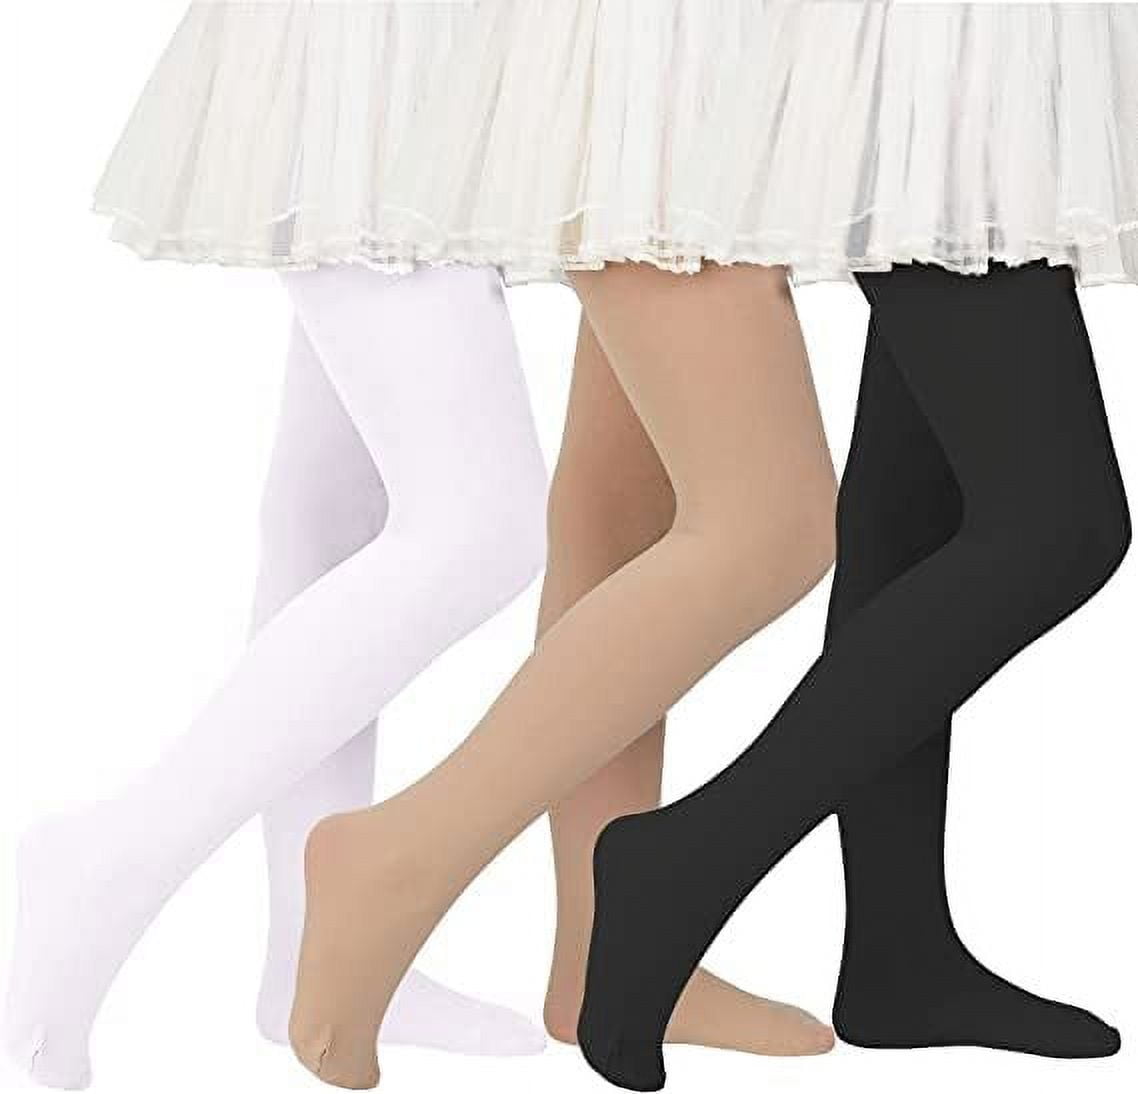  Frola Girls' Opaque Footless Tights Ultra Soft Solid